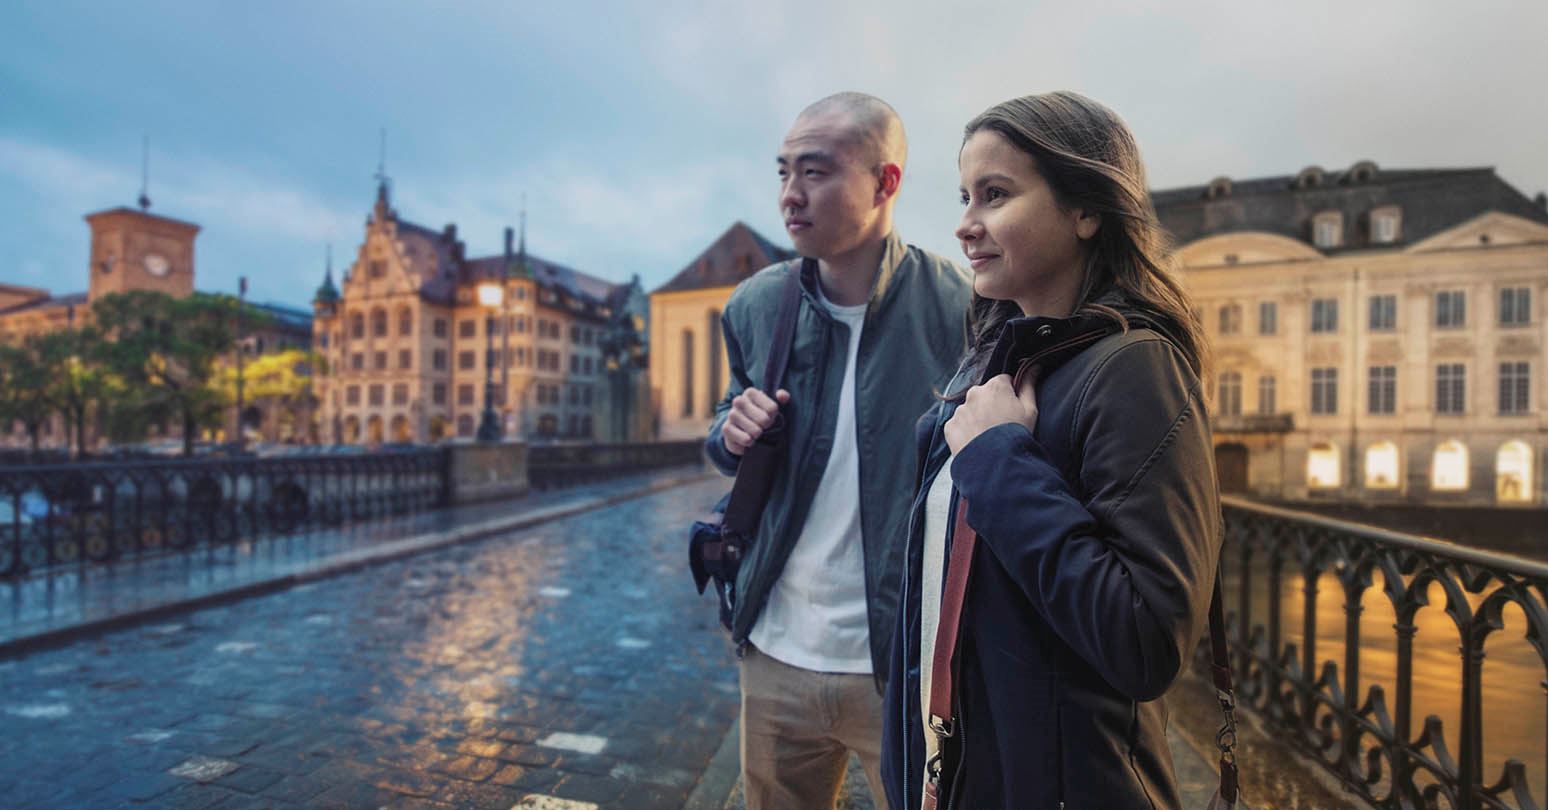 A young man and young woman walking together in Geneva with water and buildings in the background